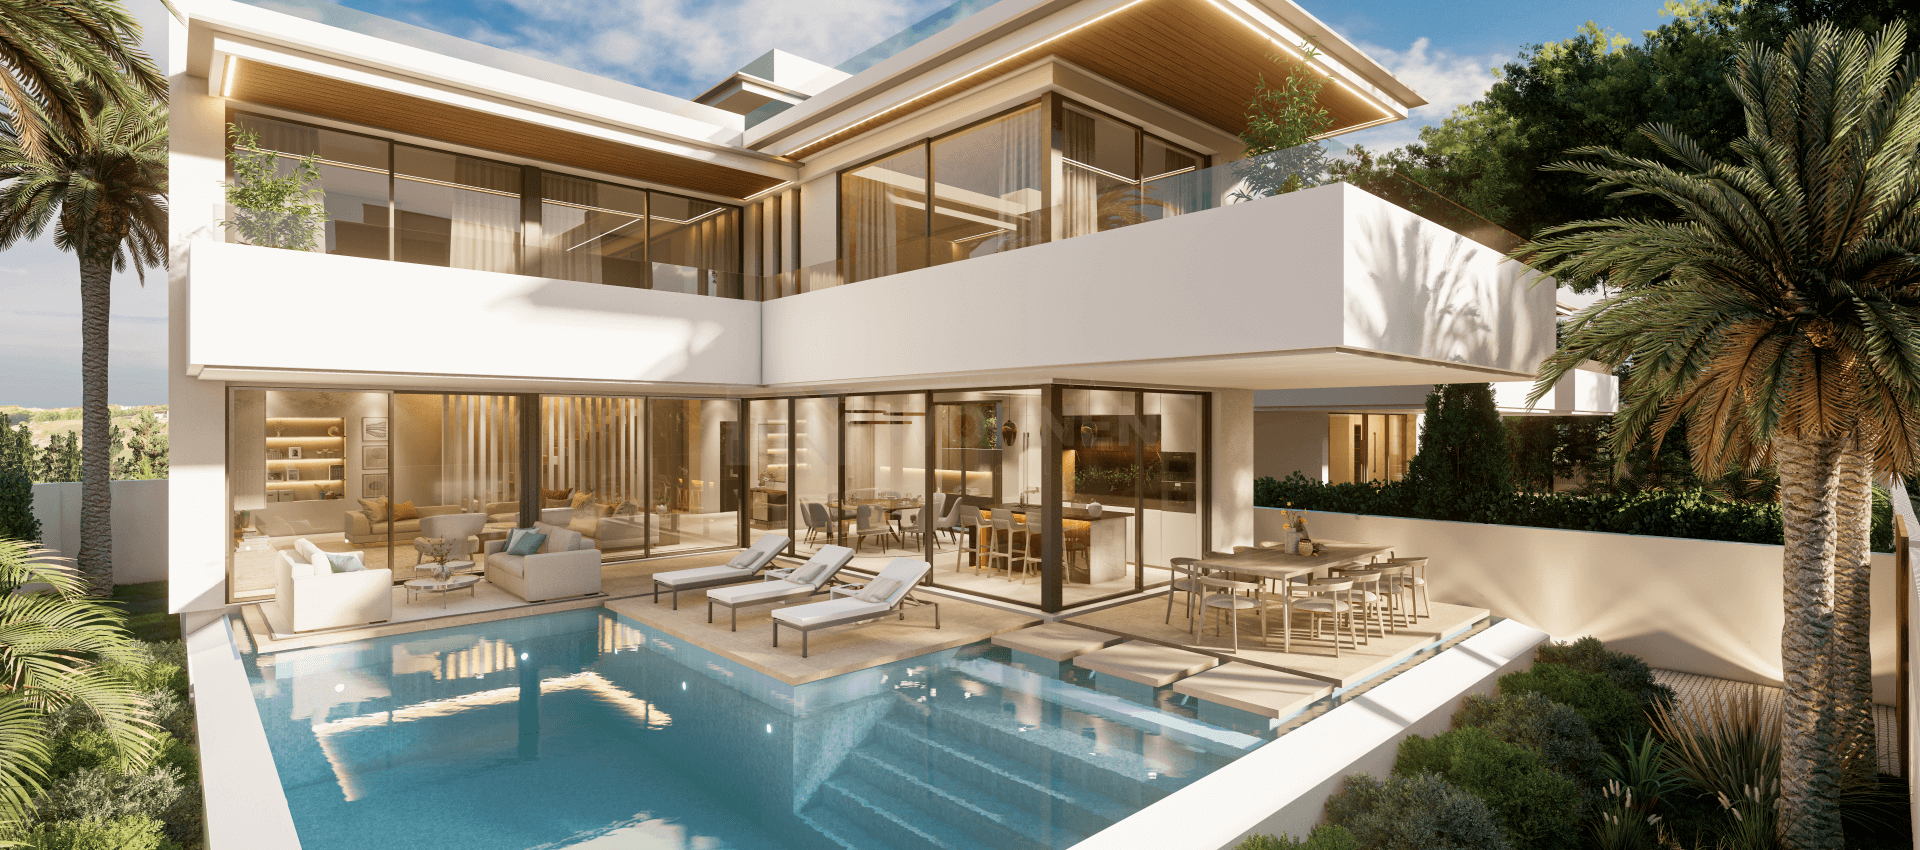 Exclusive project in the privileged residential area of Puerto Banus